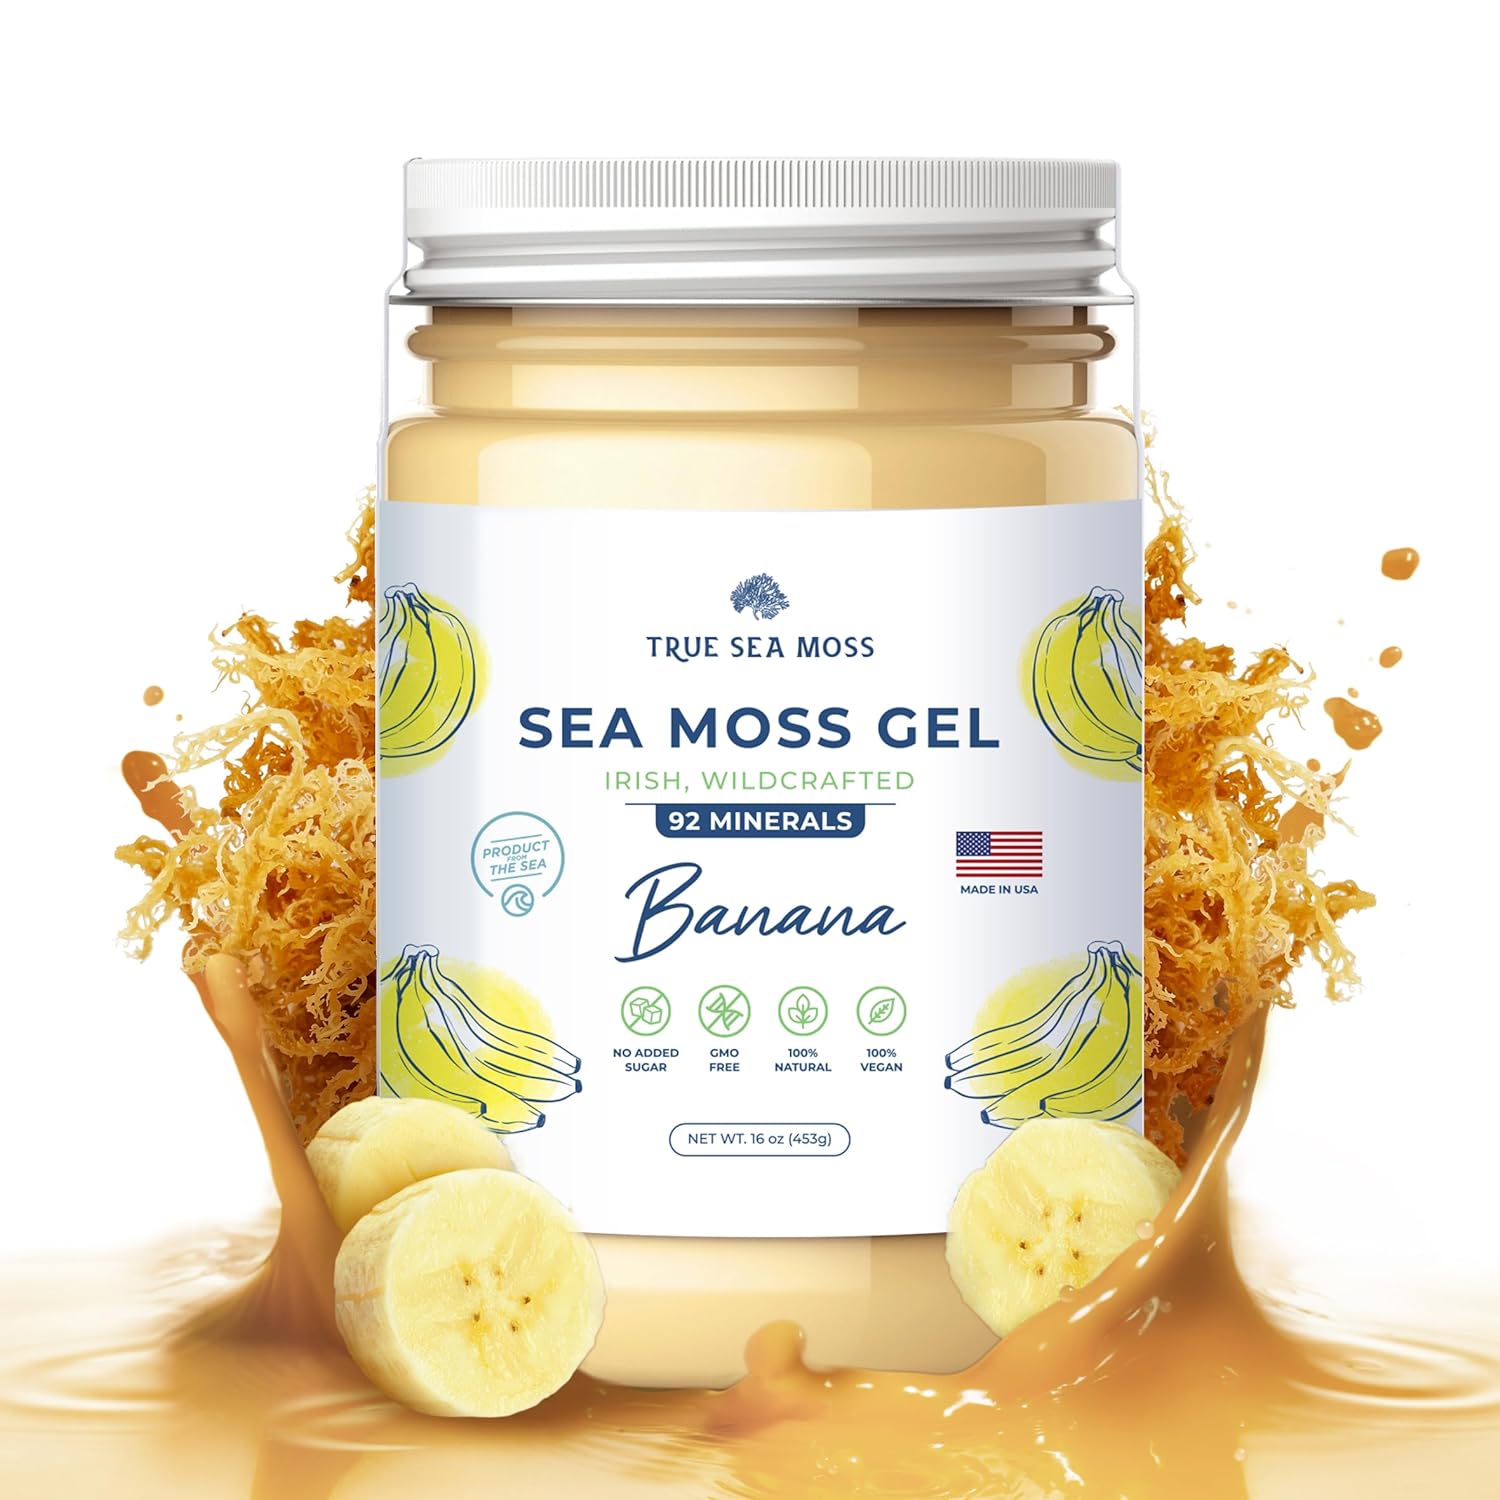 TrueSeaMoss Wildcrafted Irish Sea Moss Gel - Made with Dried Seaweed - Seamoss, Vegan-Friendly, Antioxidant Supports Thyroid & Digestion - Made in USA (Banana, Pack of 1)